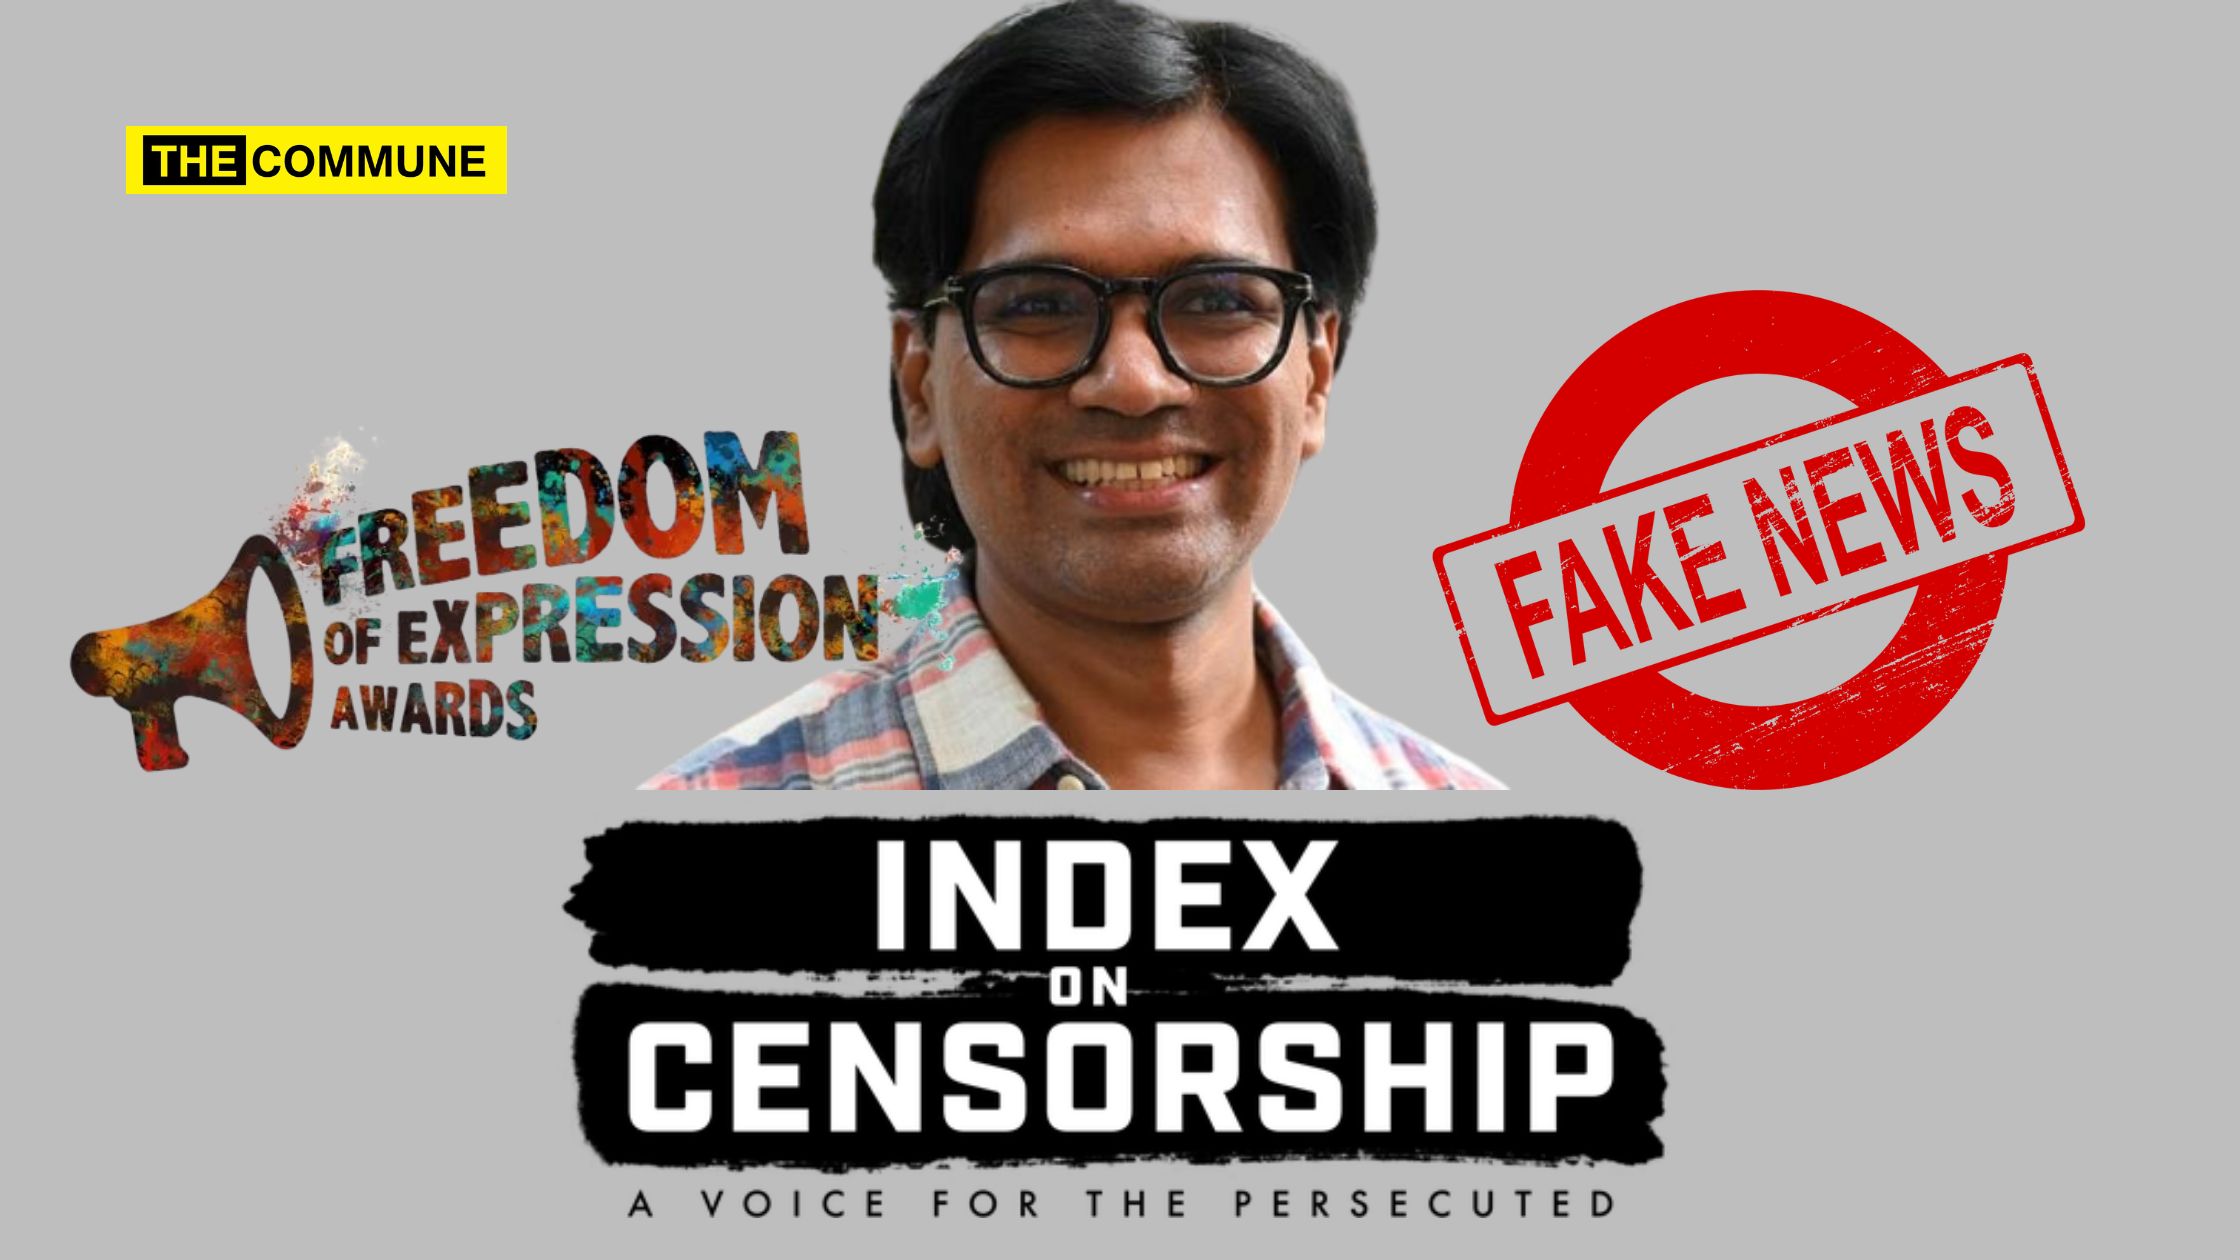 Serial Fake News Peddler Of Alt News Nominated For Freedom Of Expression  Awards - The Commune